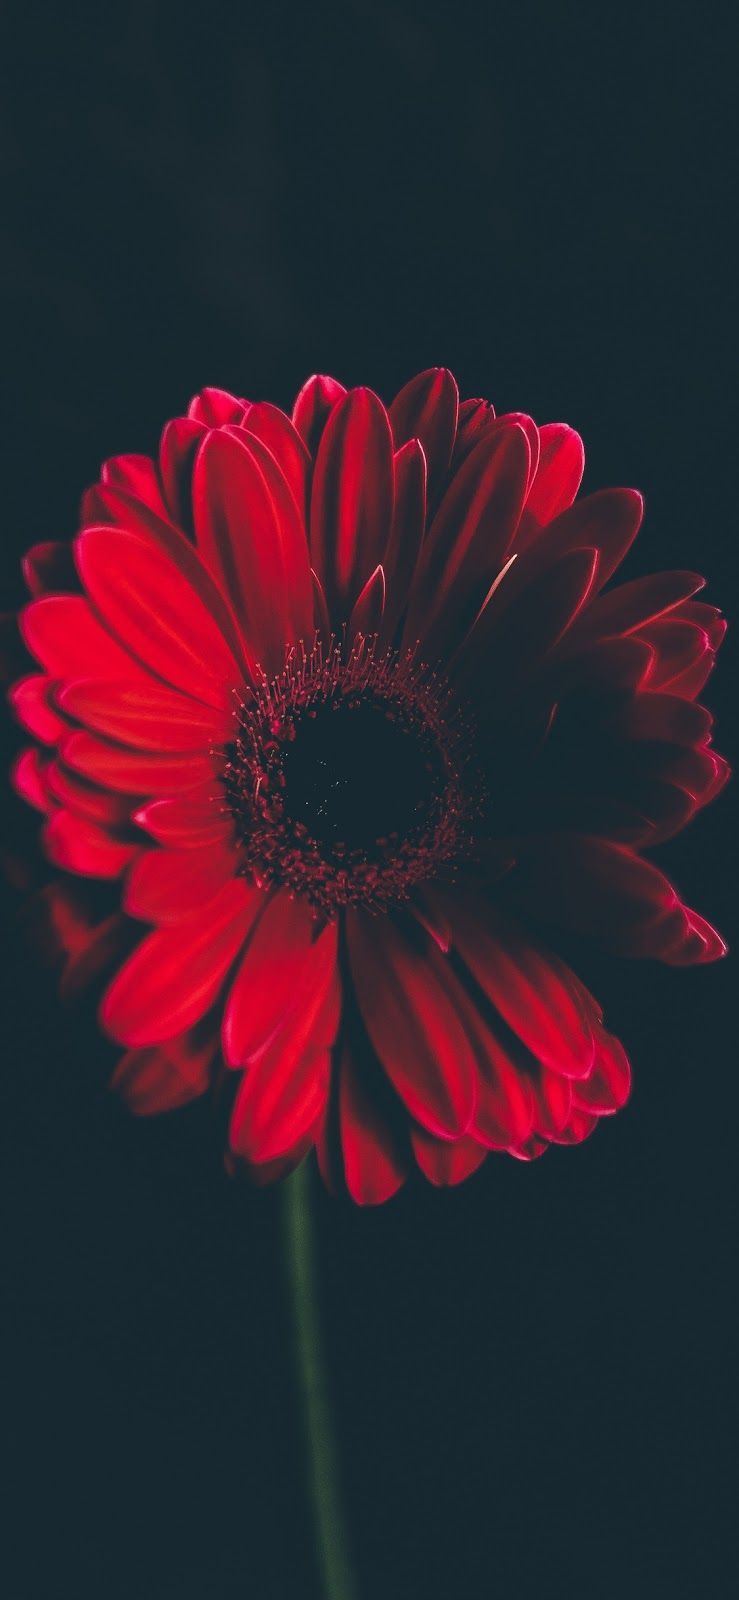 Red Flower iPhone Wallpaper On